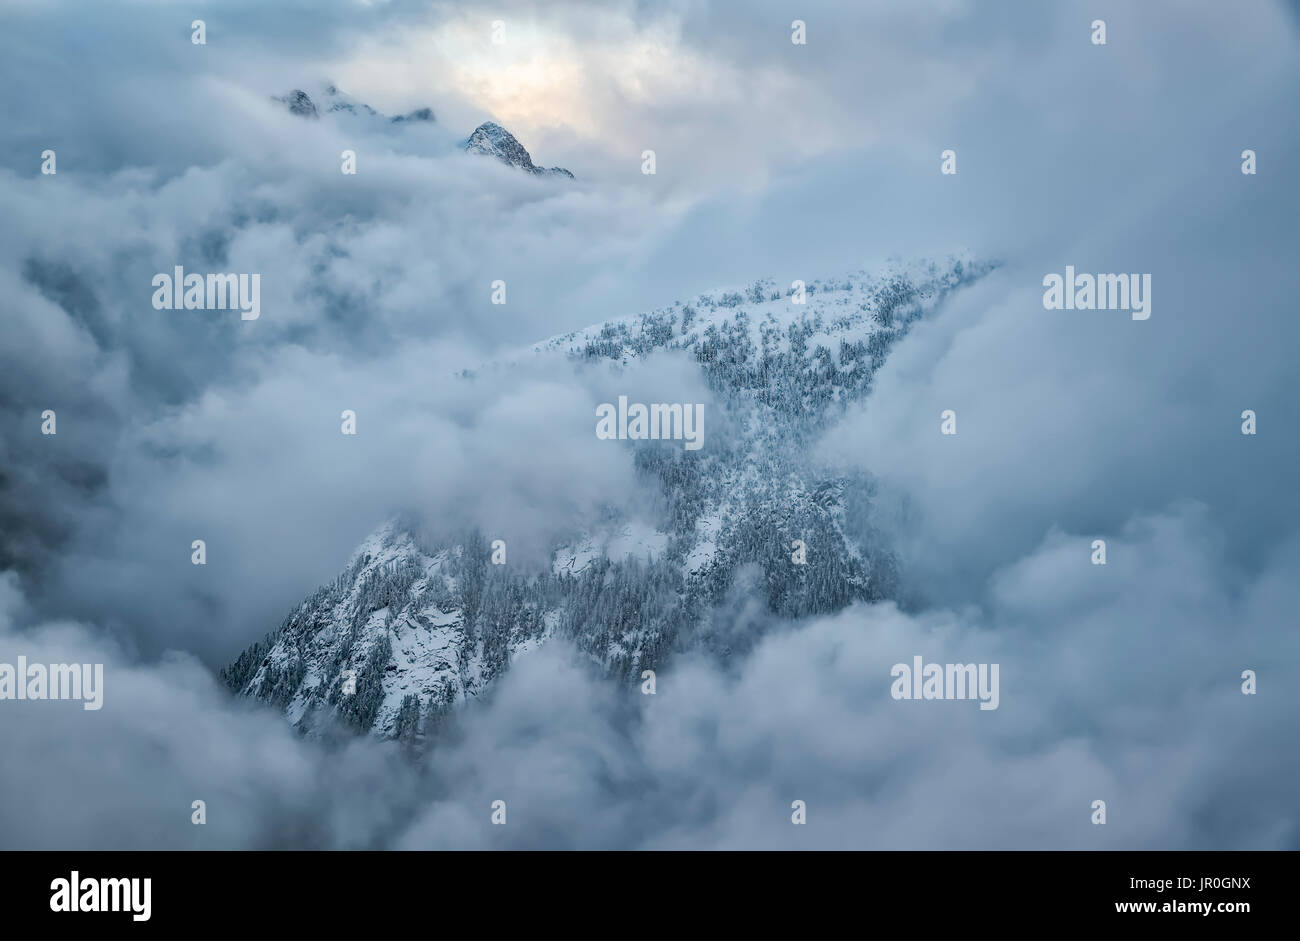 The Mountains Of Golden Ears Provincial Park Are Shrouded In Clouds In The Aerial Photo; British Columbia, Canada Stock Photo